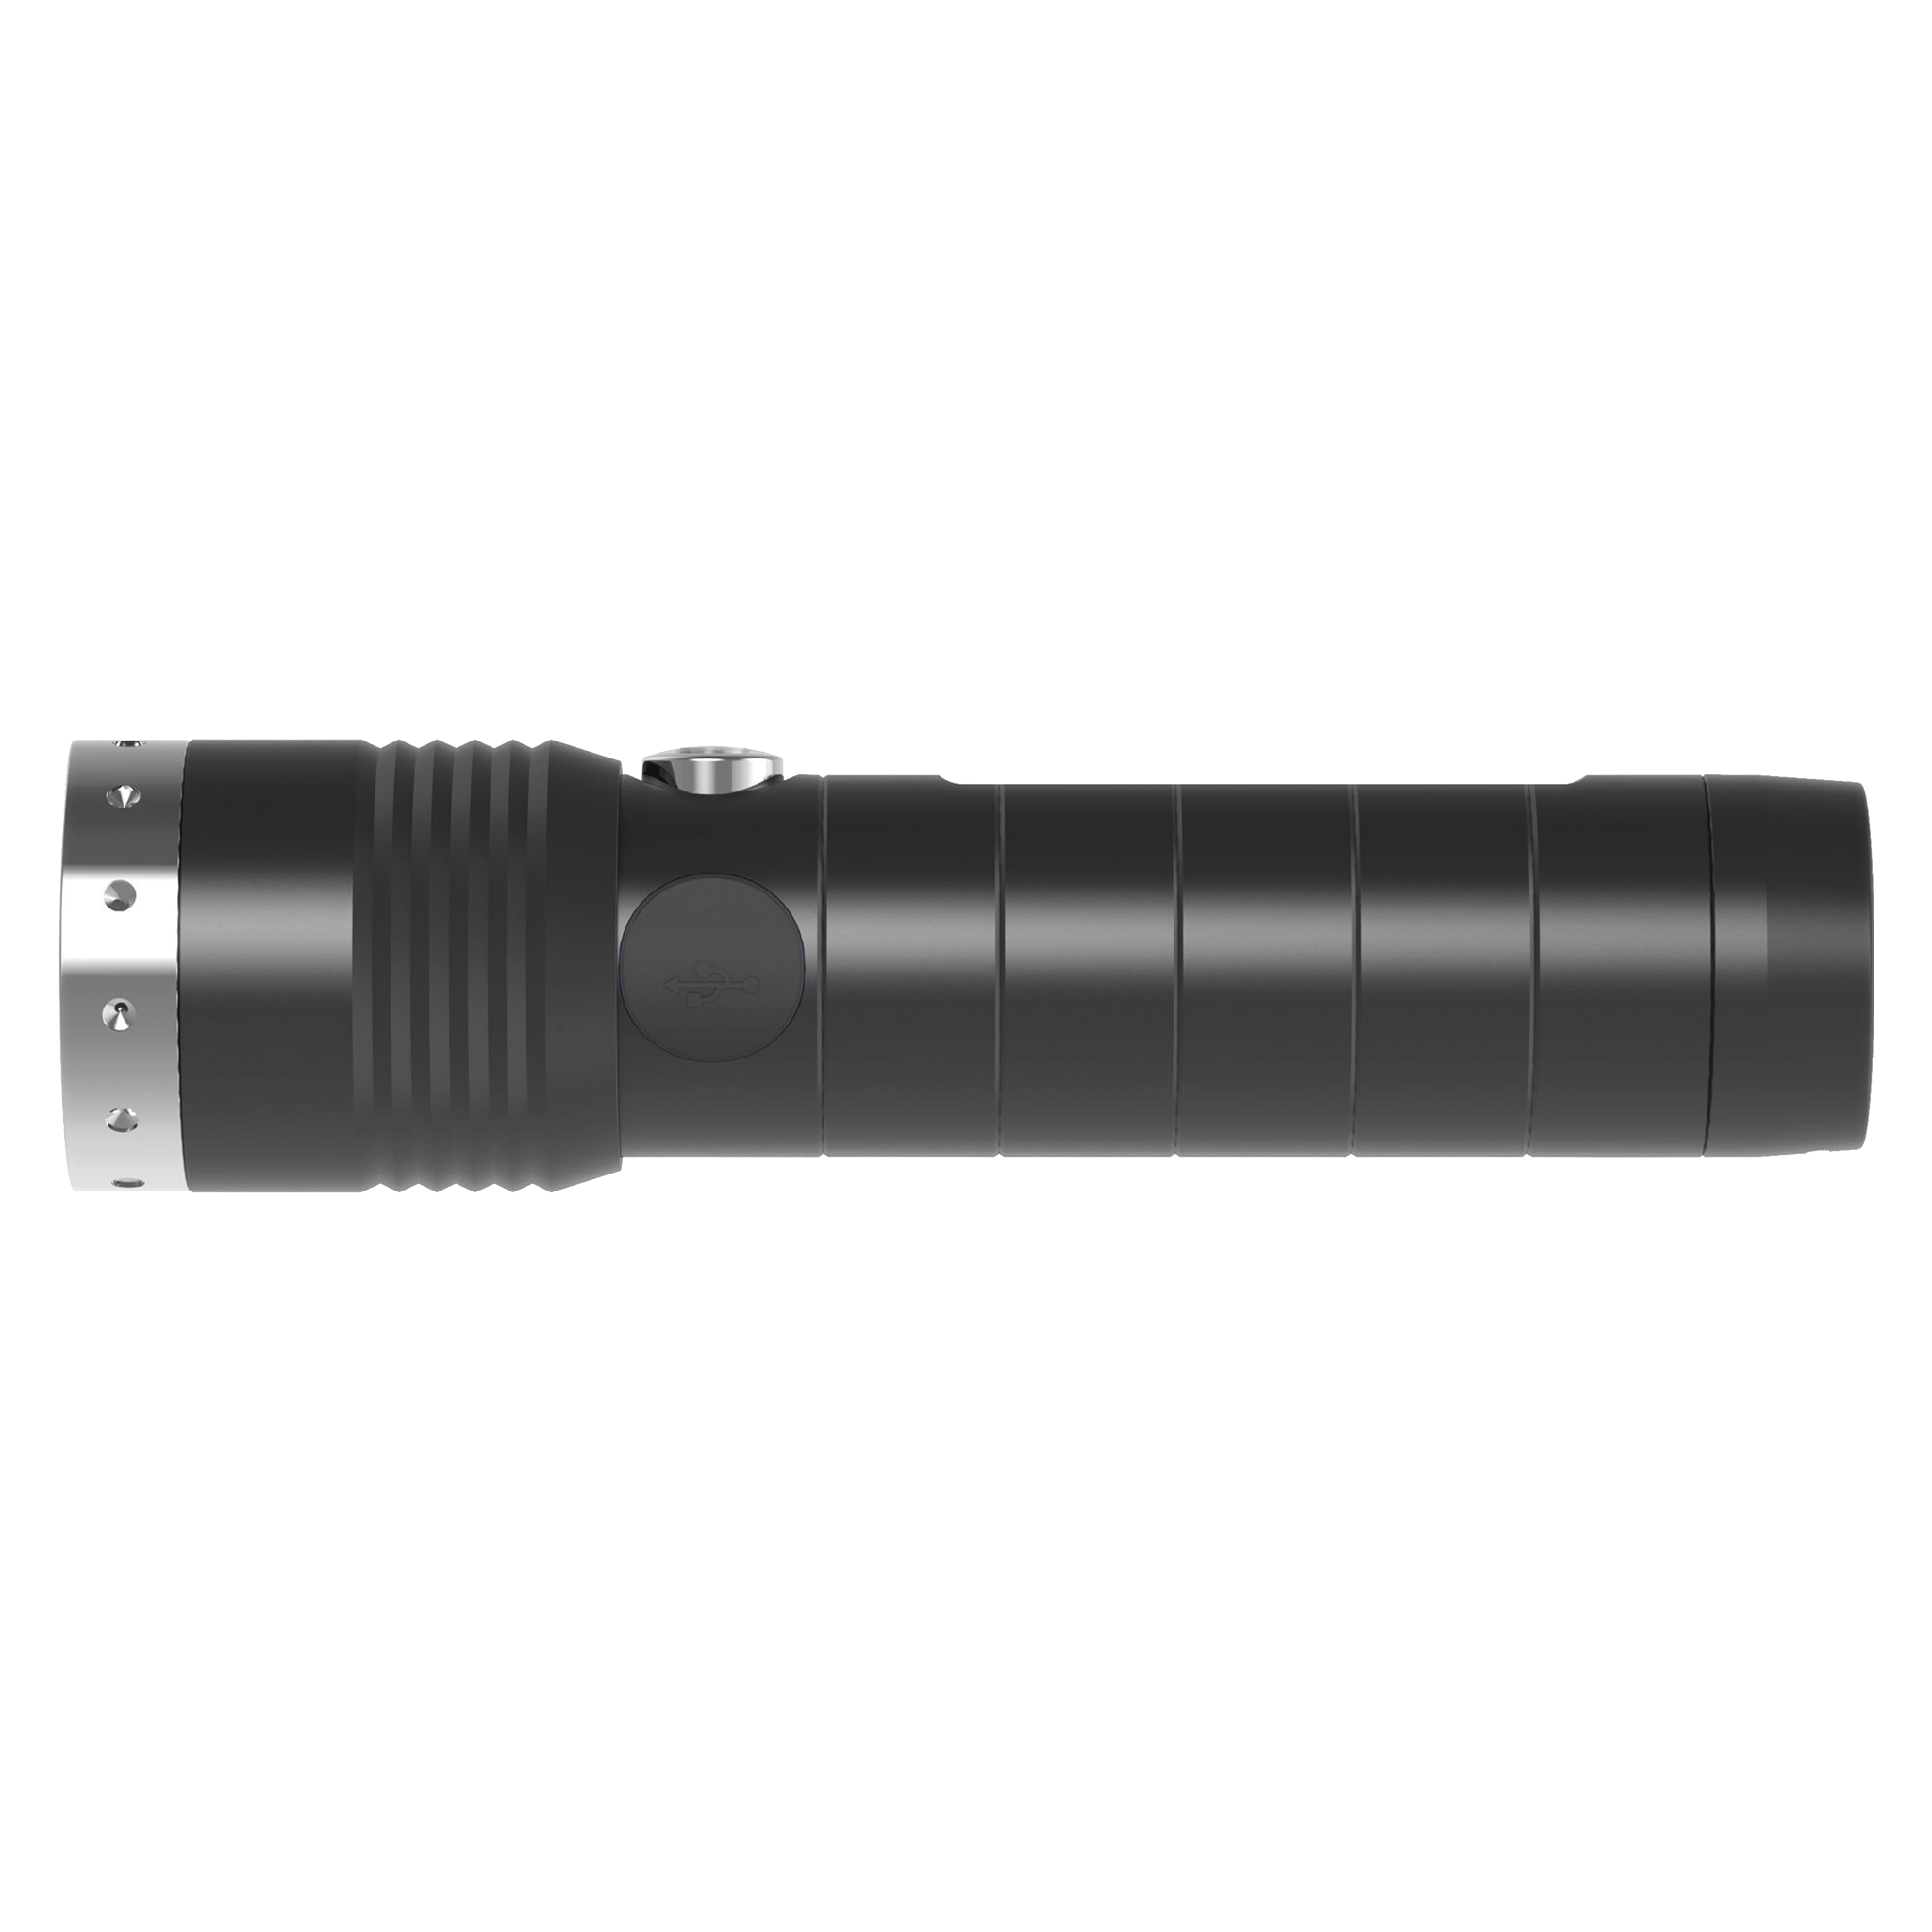 MT14 Rechargeable Torch